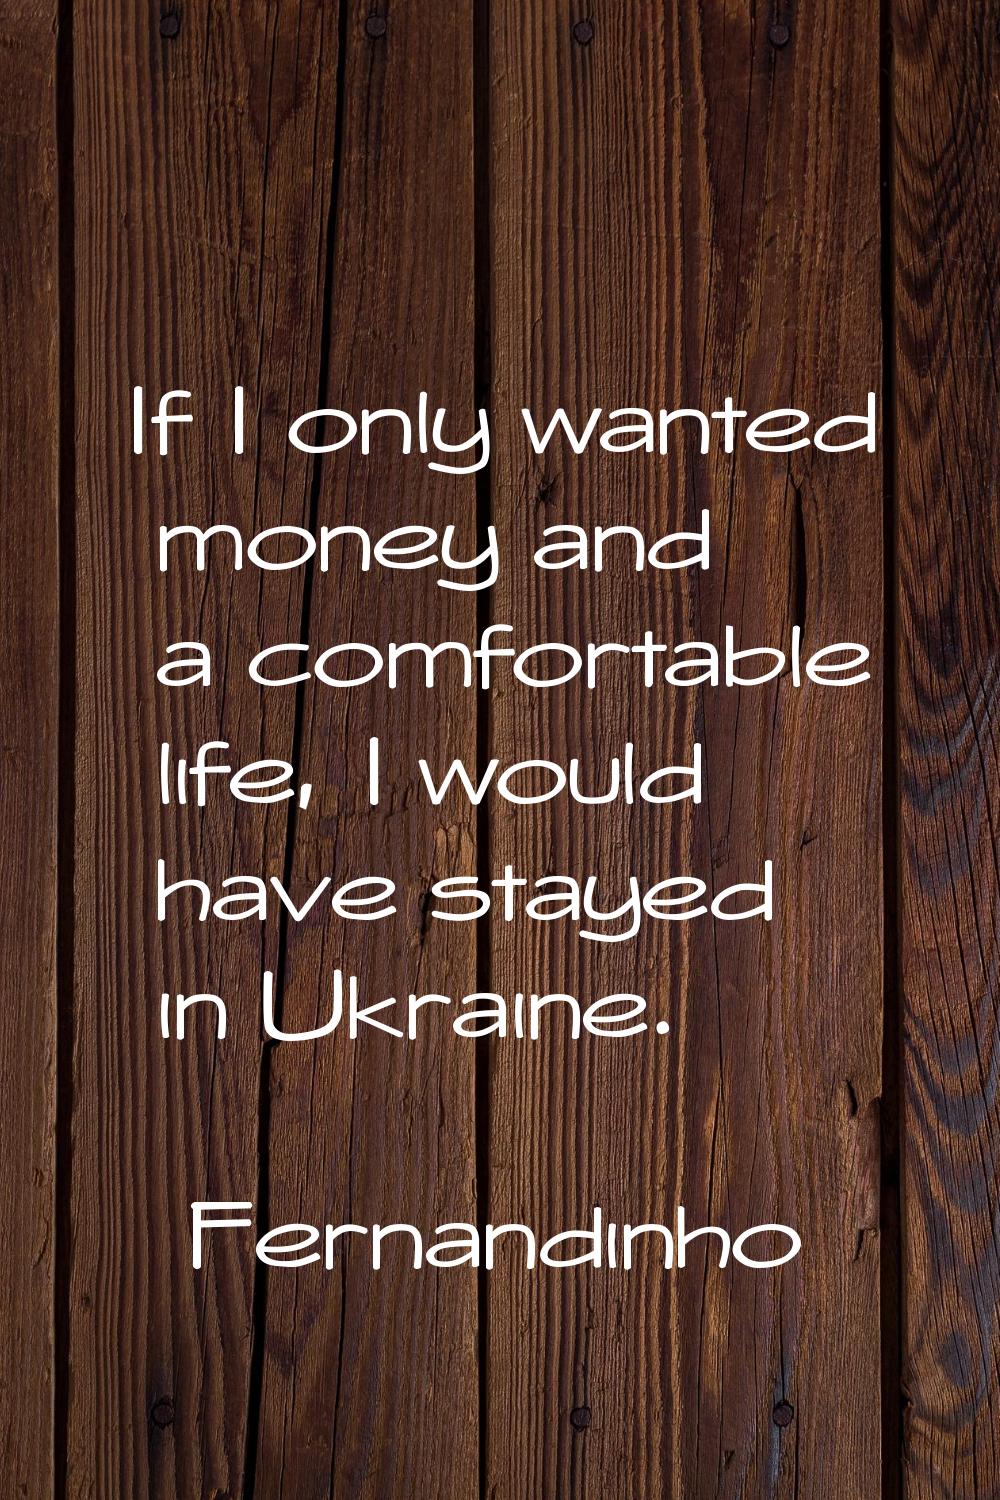 If I only wanted money and a comfortable life, I would have stayed in Ukraine.